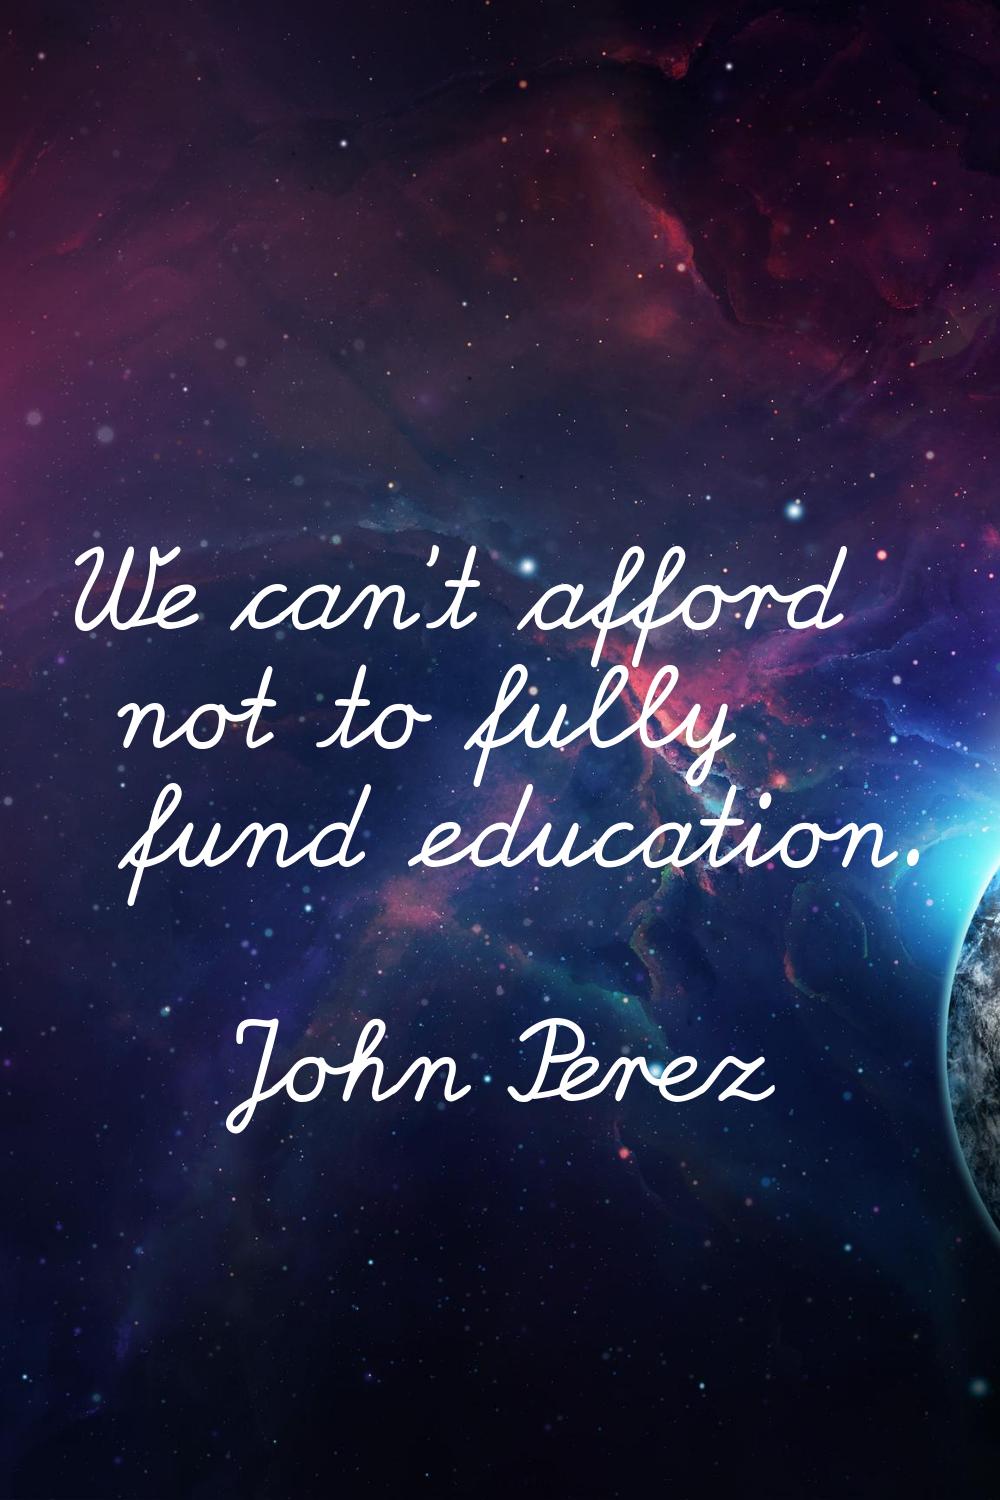 We can't afford not to fully fund education.